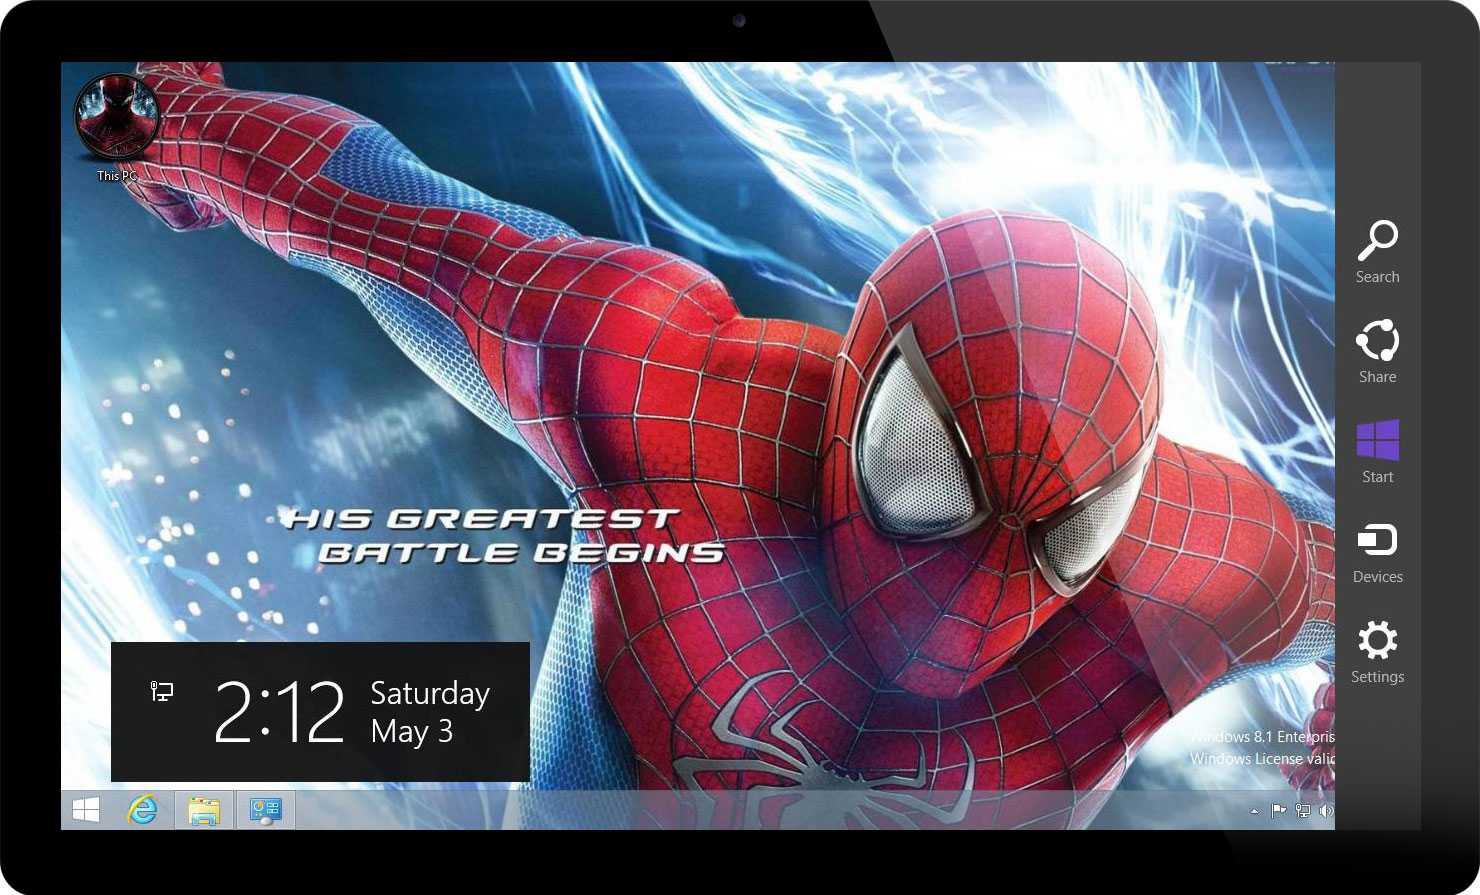 The Amazing Spider-Man 2 Theme For Windows 7 and Windows 8